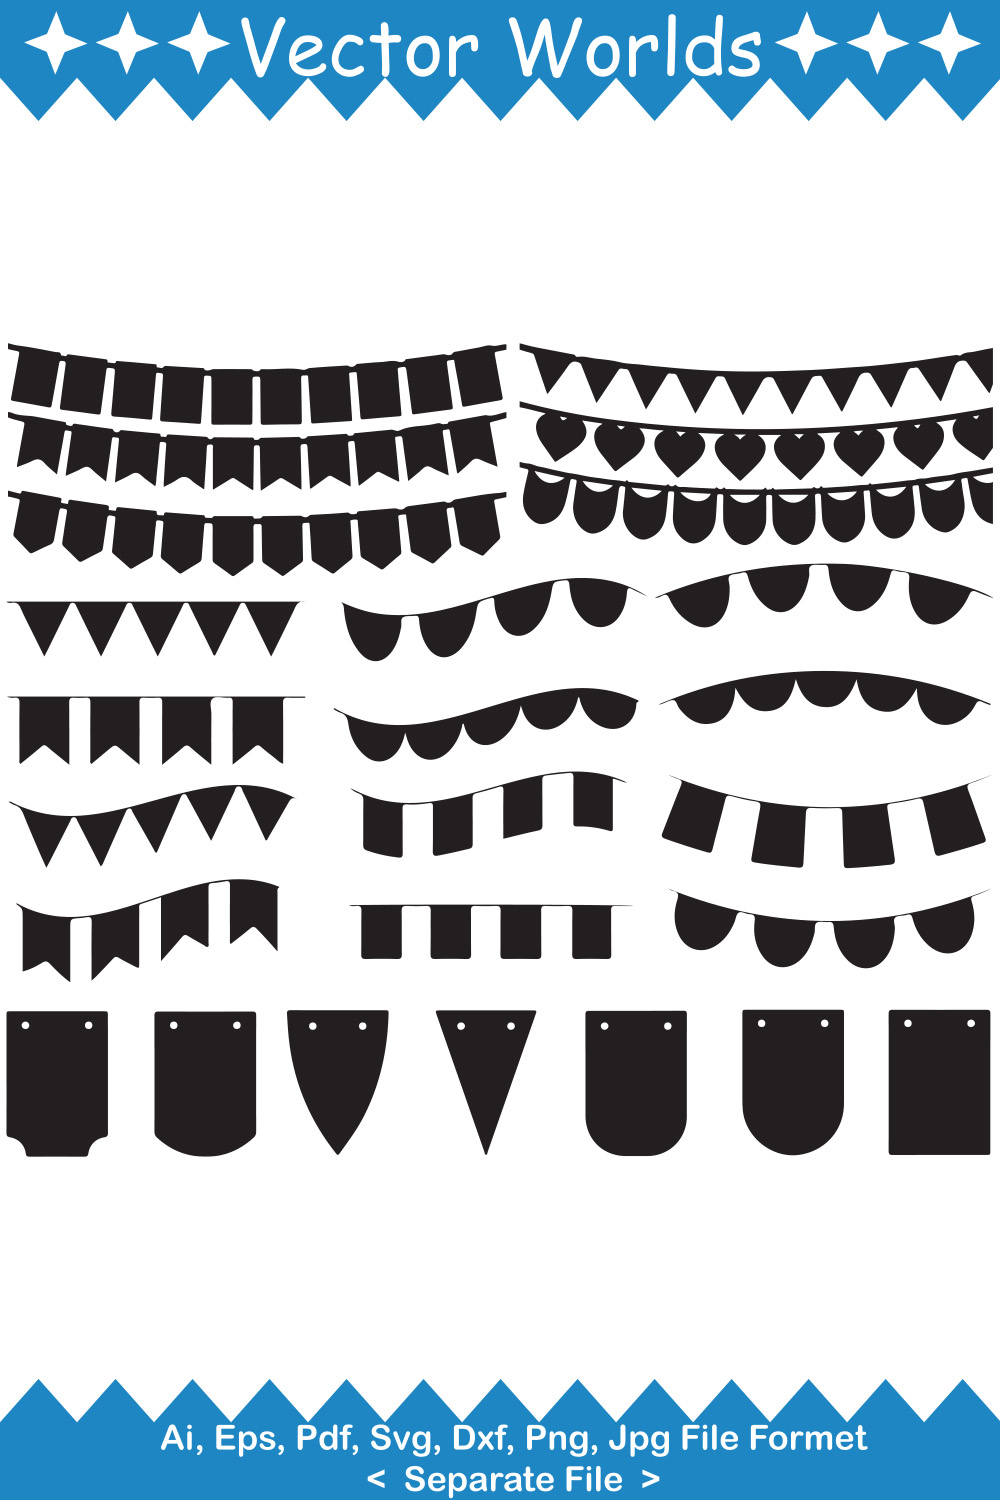 A selection of vector beautiful images of bunting banners in black.